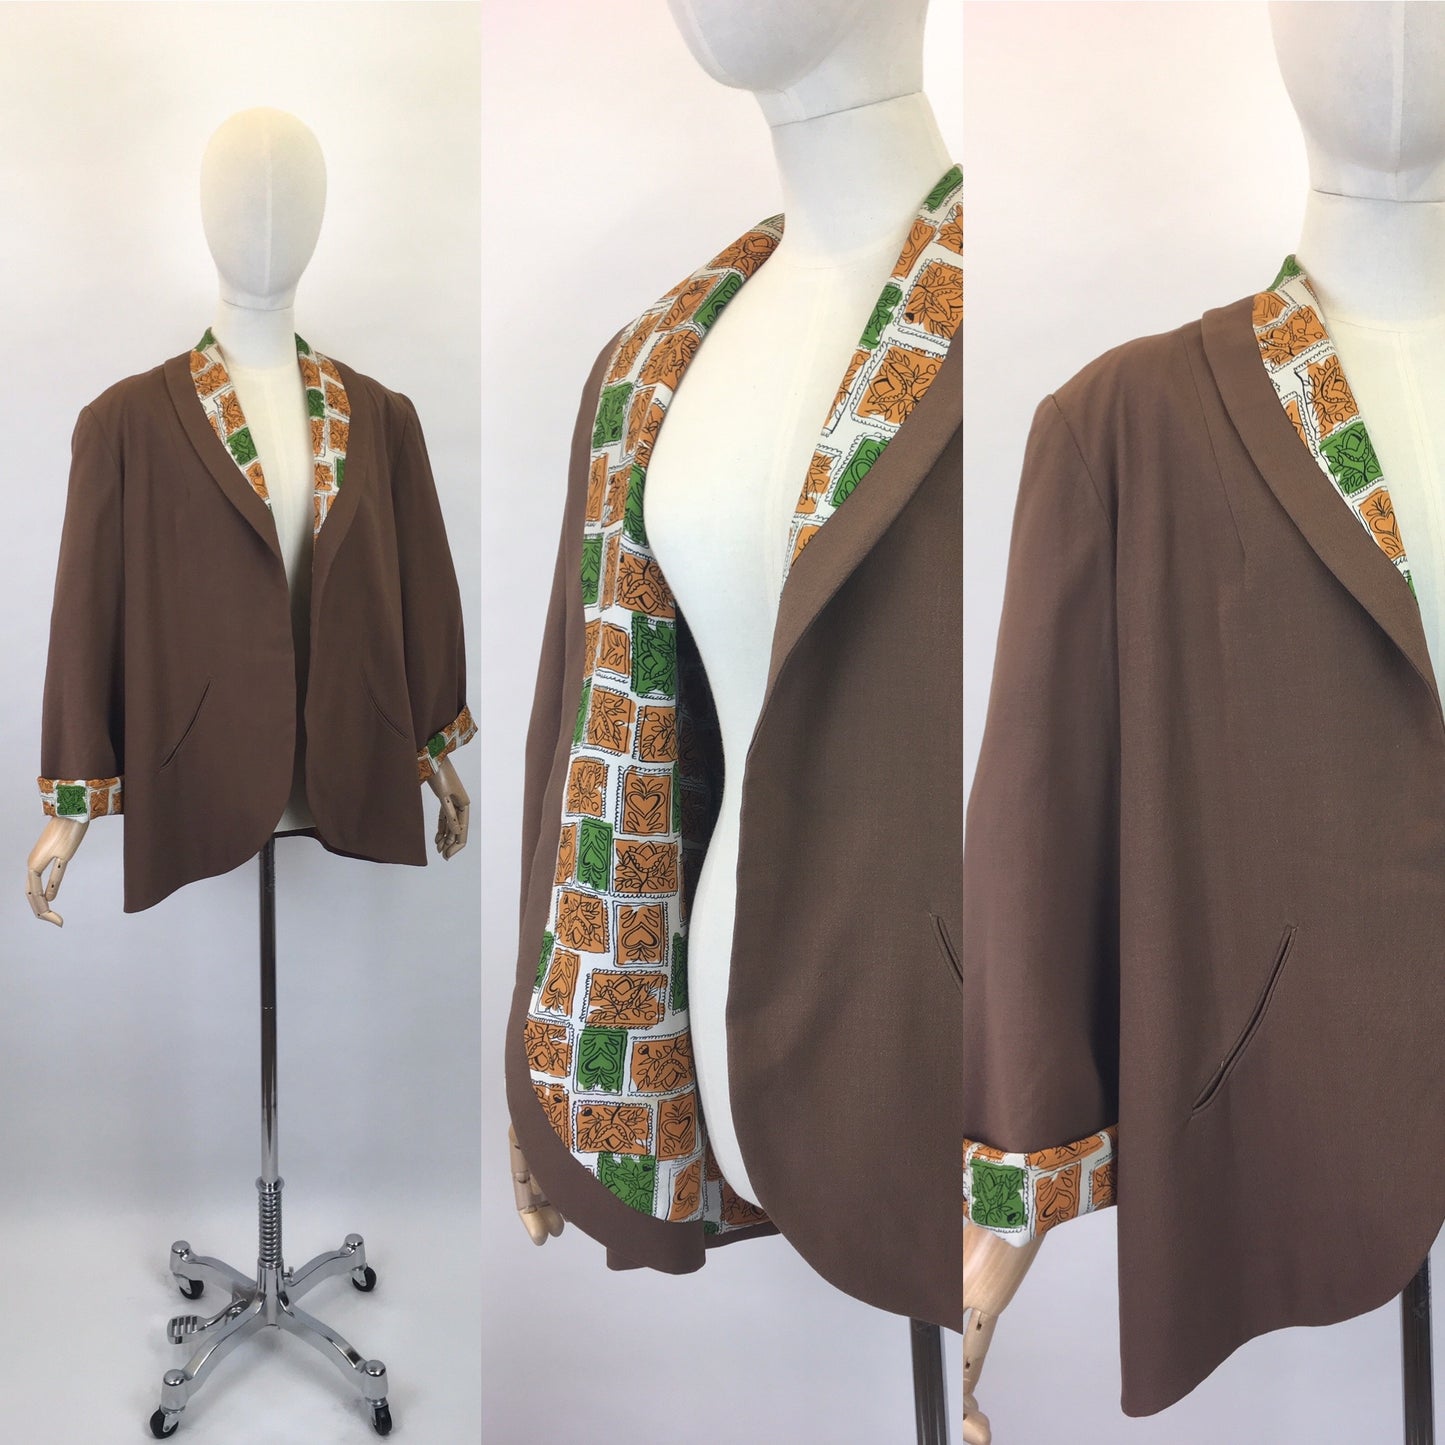 Original 1940s Brown Linen Swing Jacket - With a Fabulous Contrast Rayon Lining in Bright Oranges and Greens